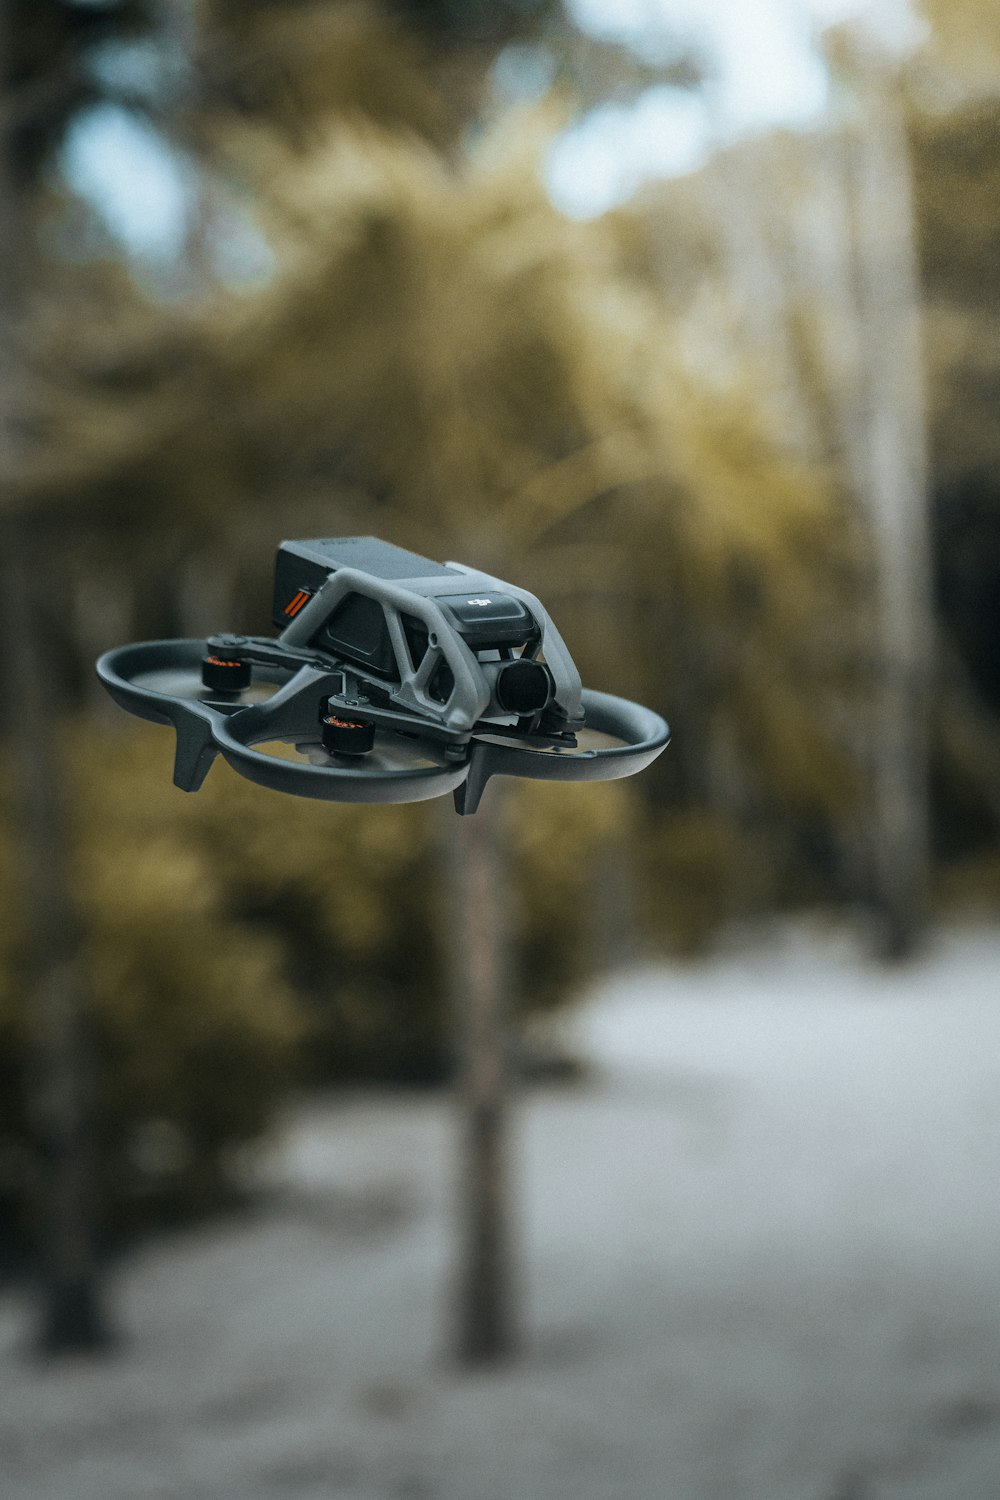 a remote controlled flying device in the air